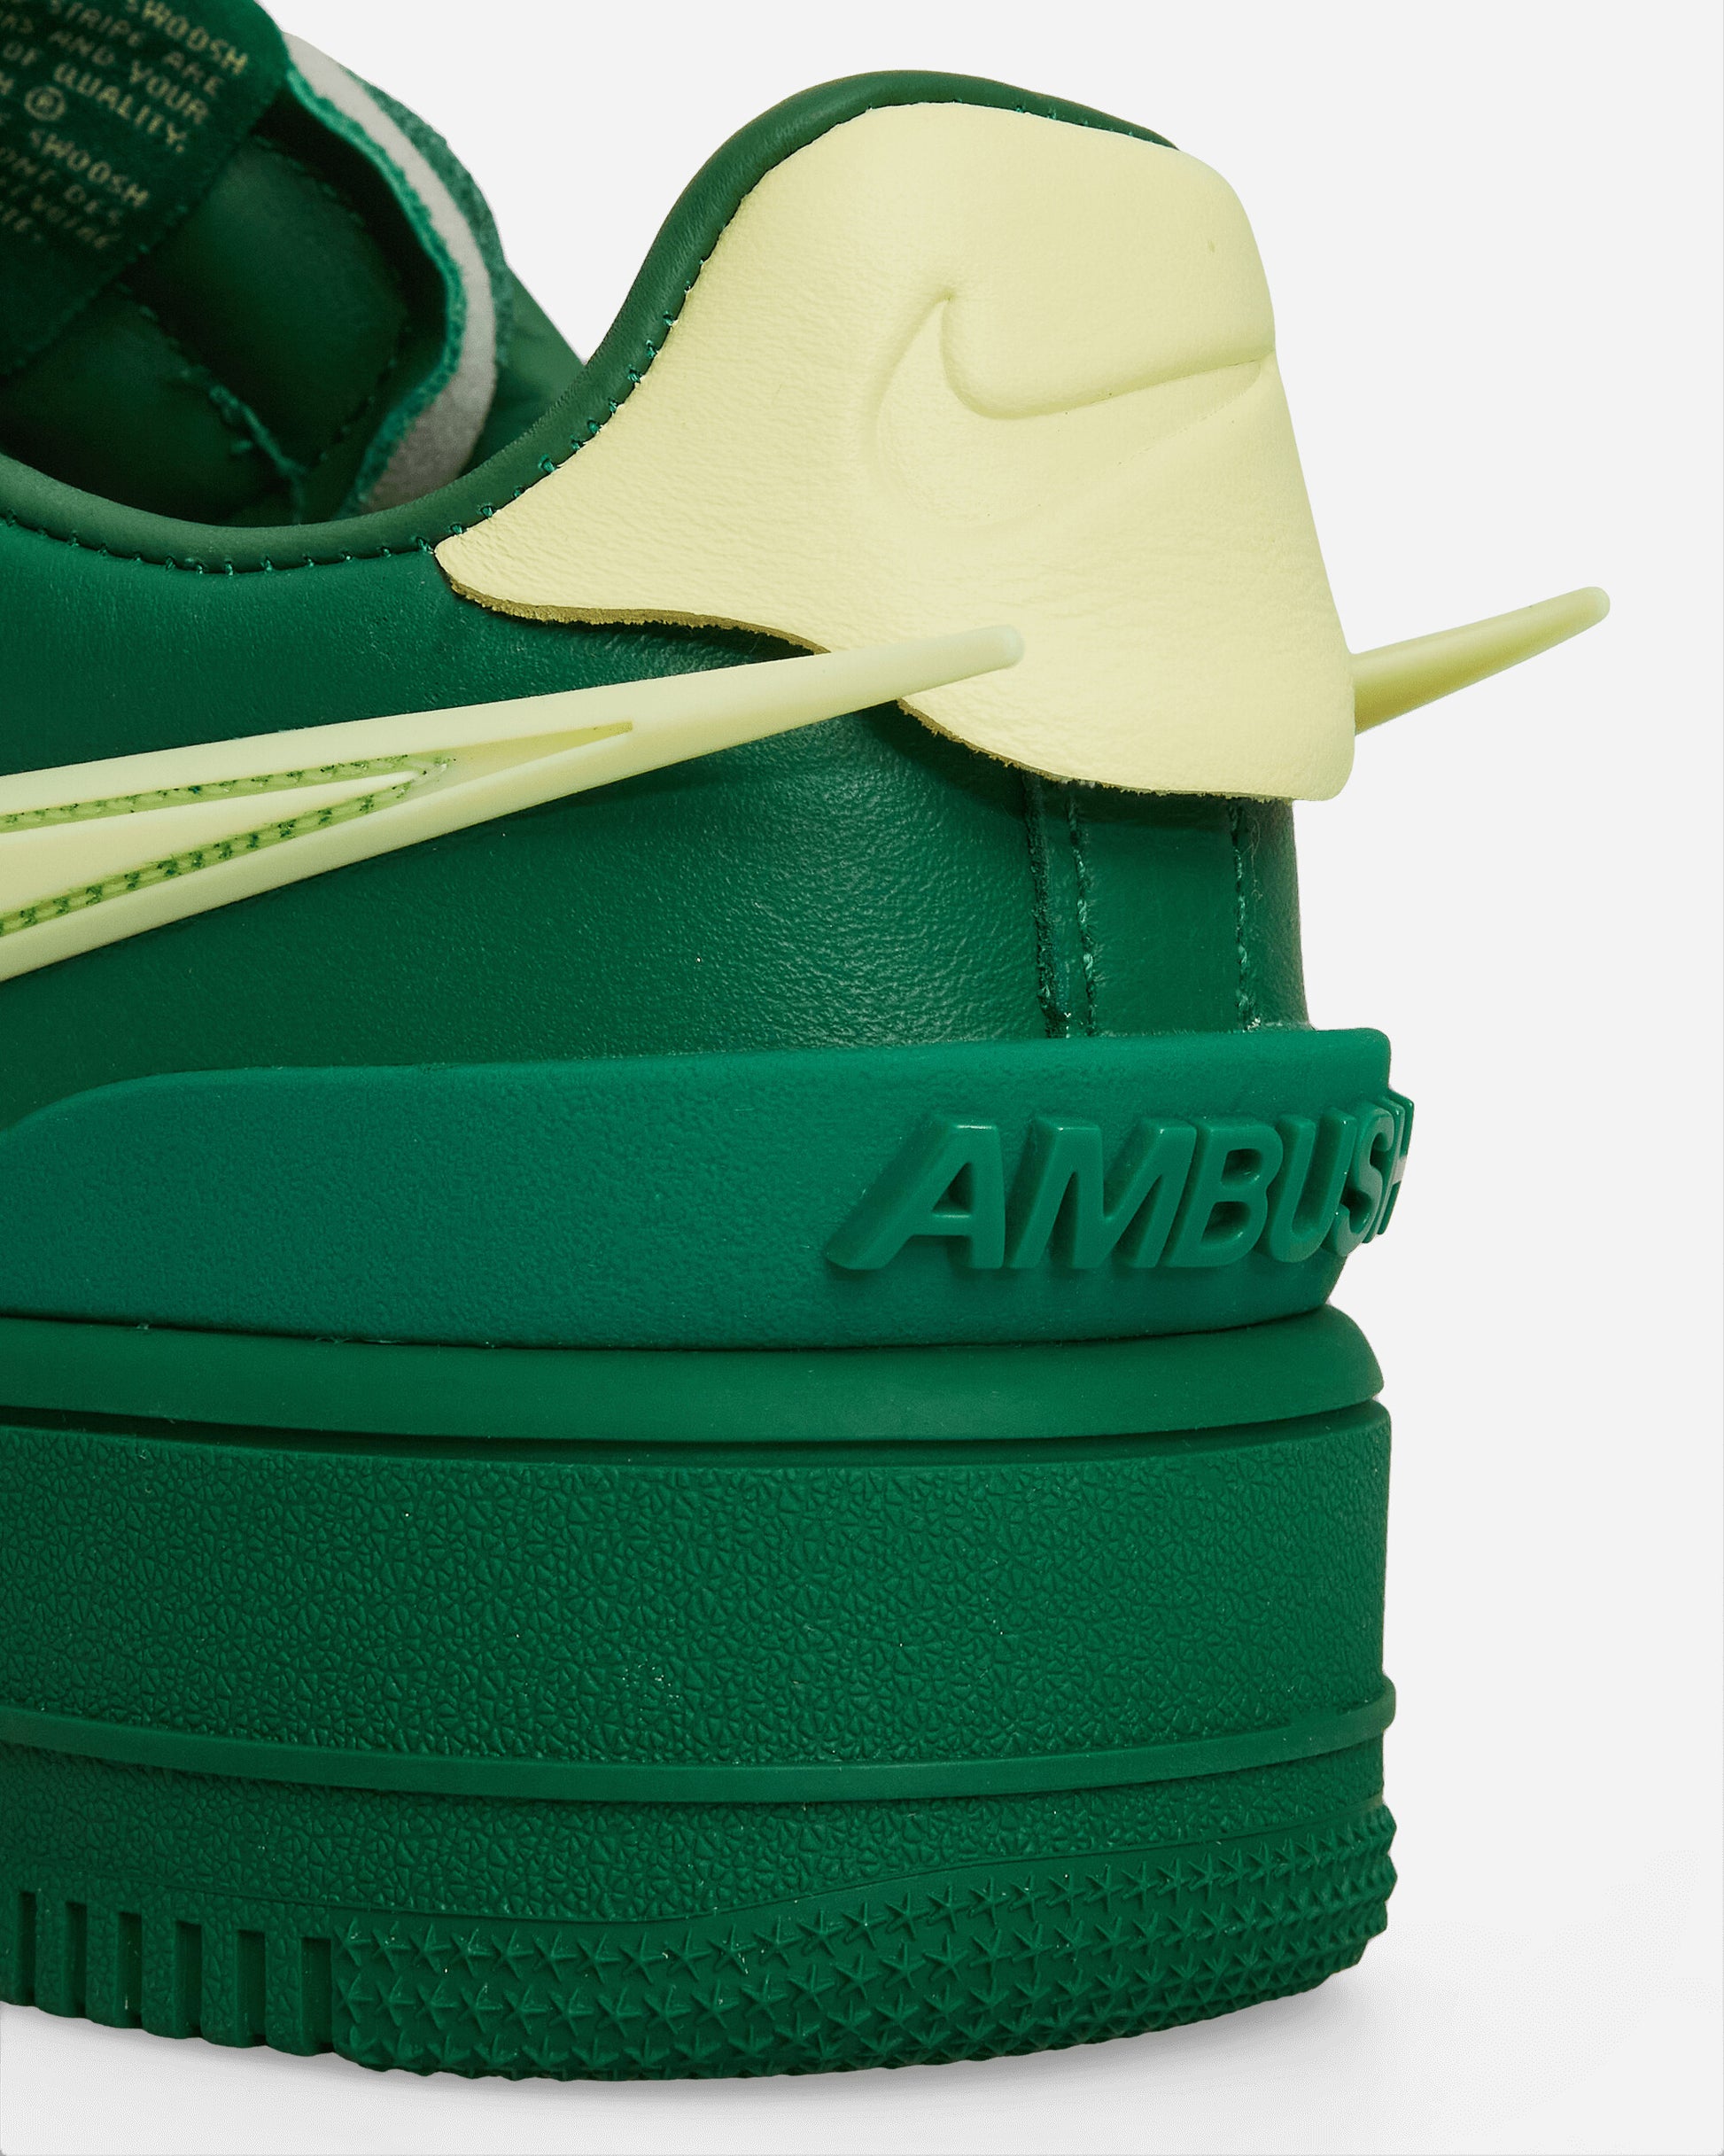 Nike Air Force 1 Low Sp Pine Green/Citron Tint Sneakers Low DV3464-300